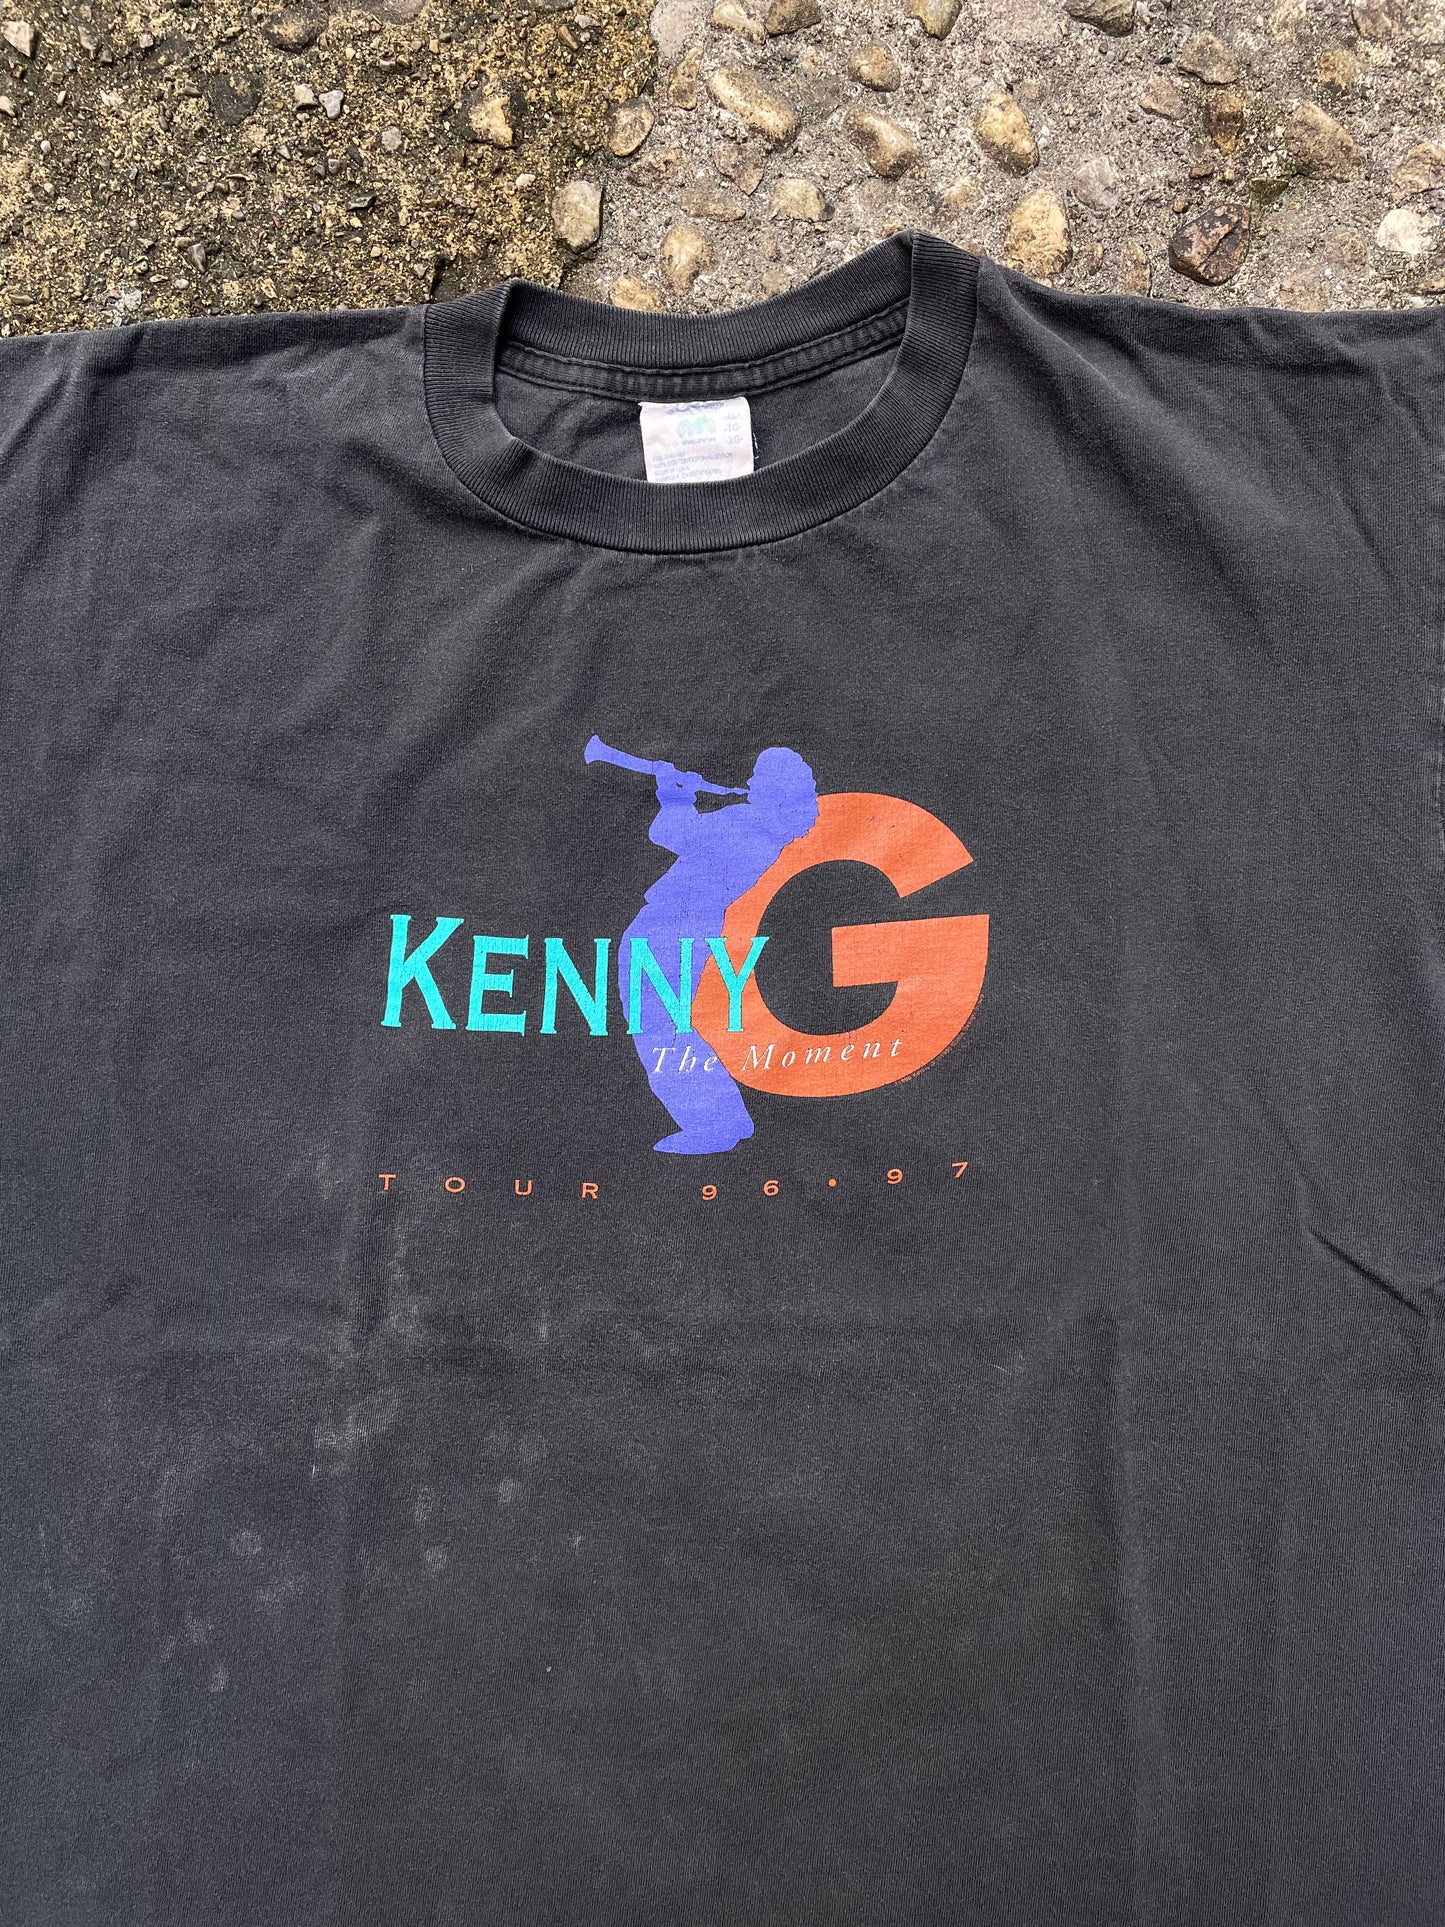 1996/1997 Kenny G The Moment Tour Band T-Shirt - XL